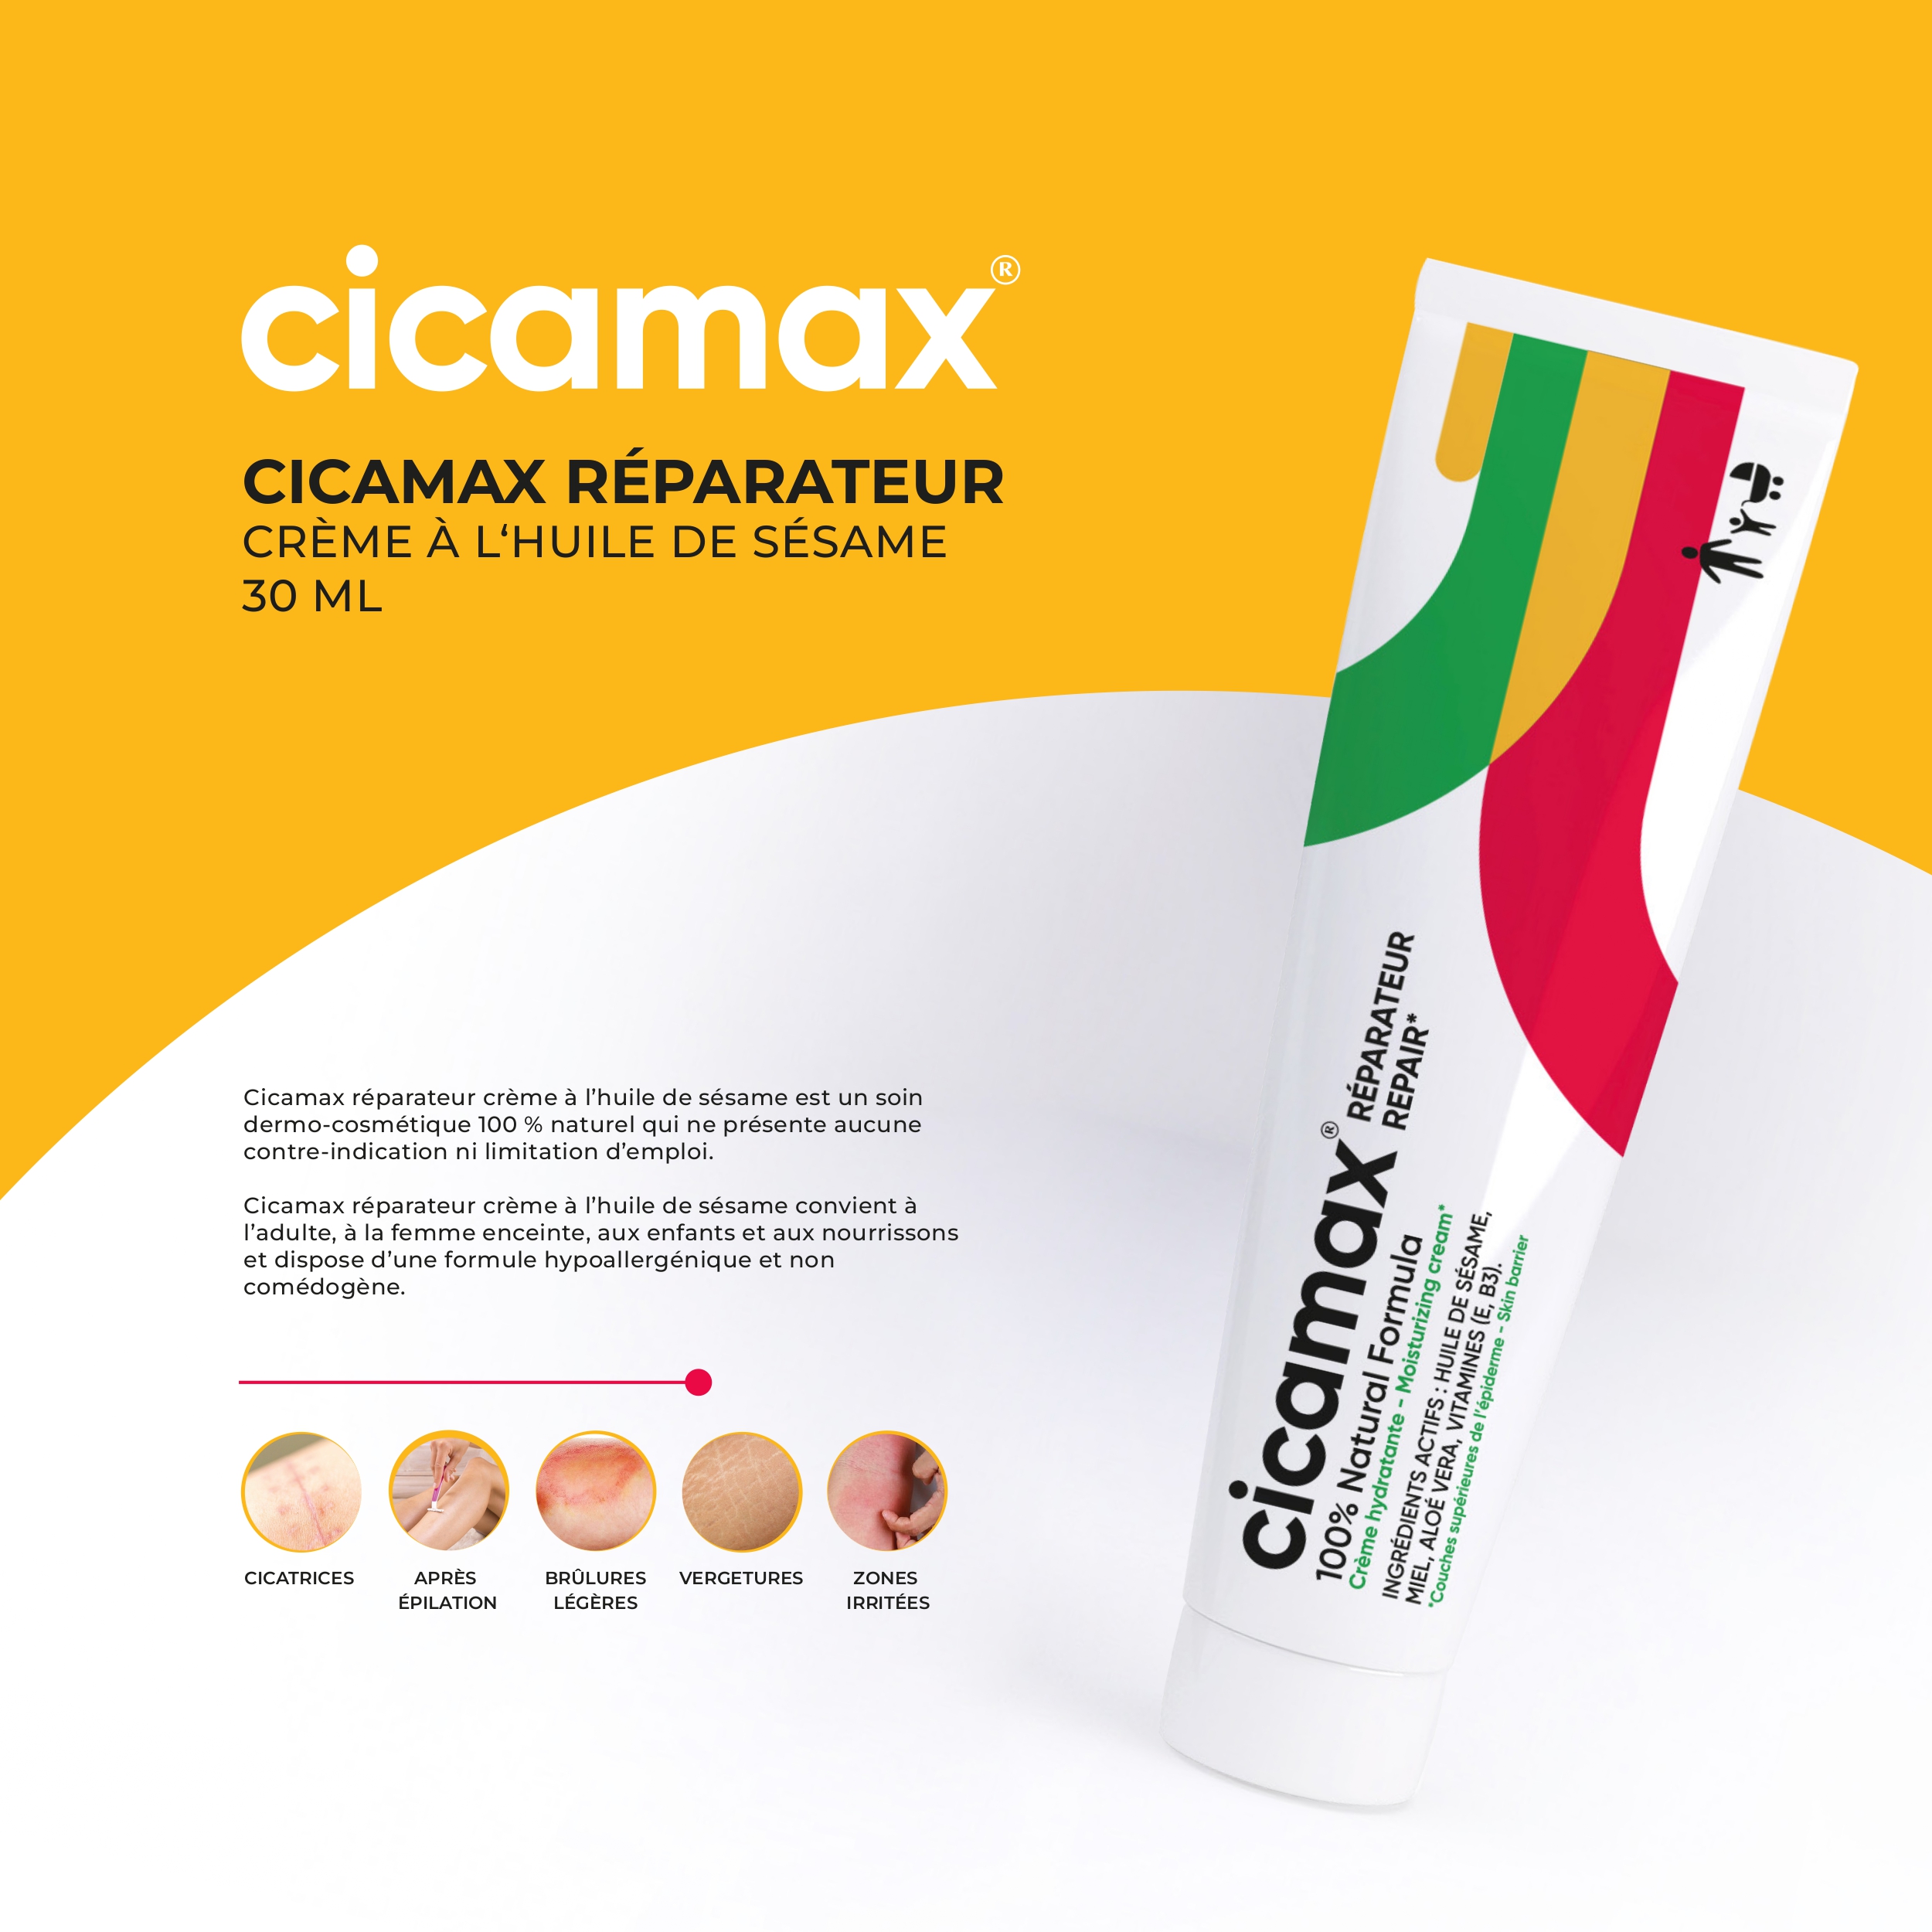 PHYTEAL CICAMAX CRE REPARATRICE